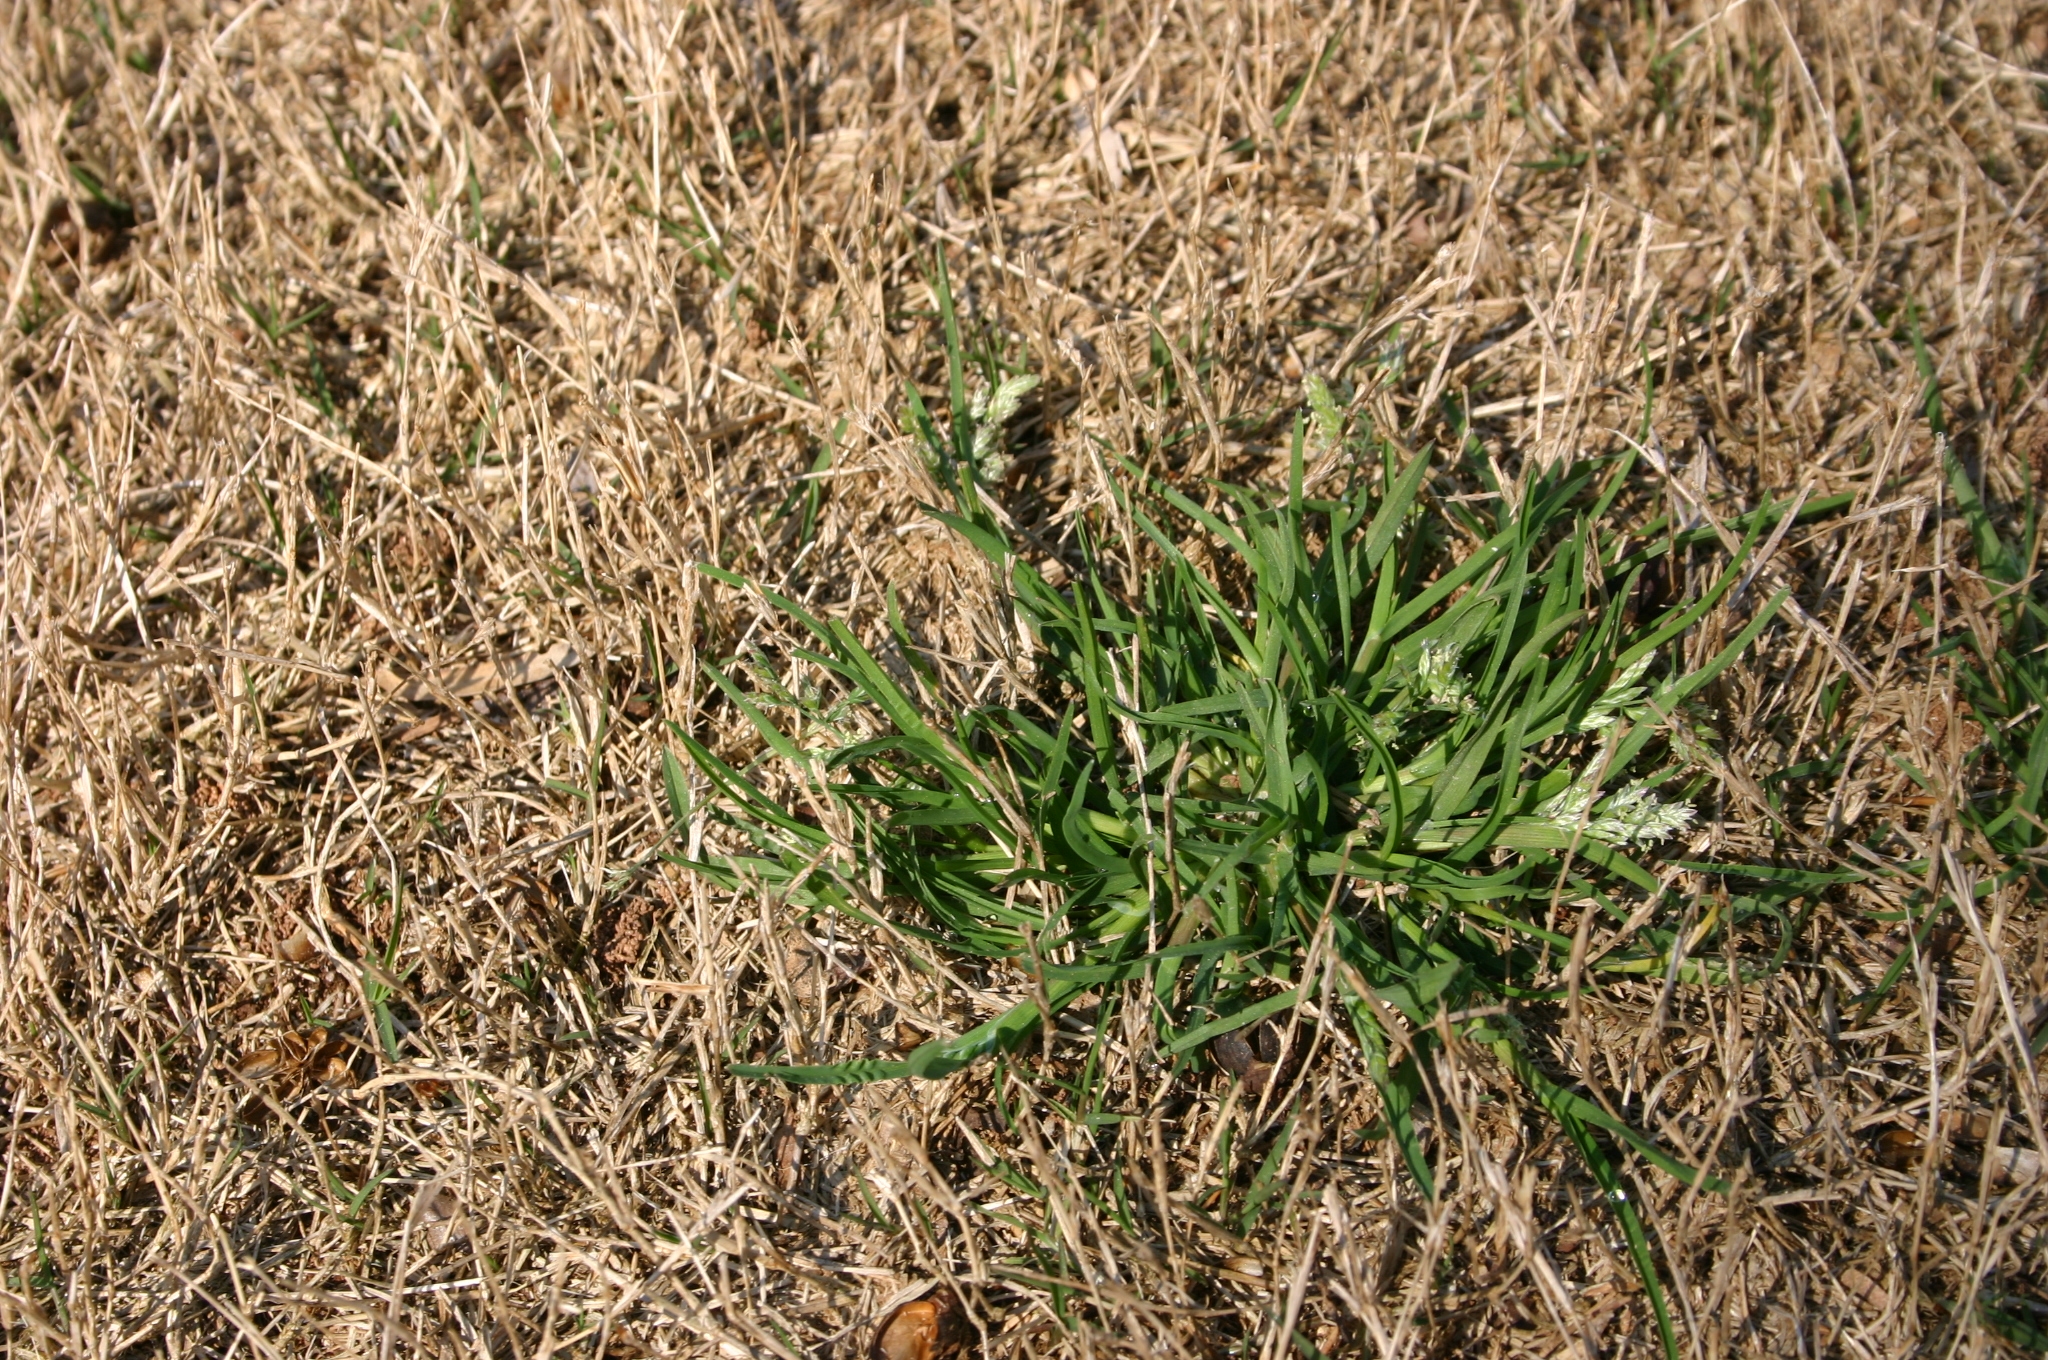 Tenacity And Poa Constrictor Use On Annual Bluegrass Poa Annua Free